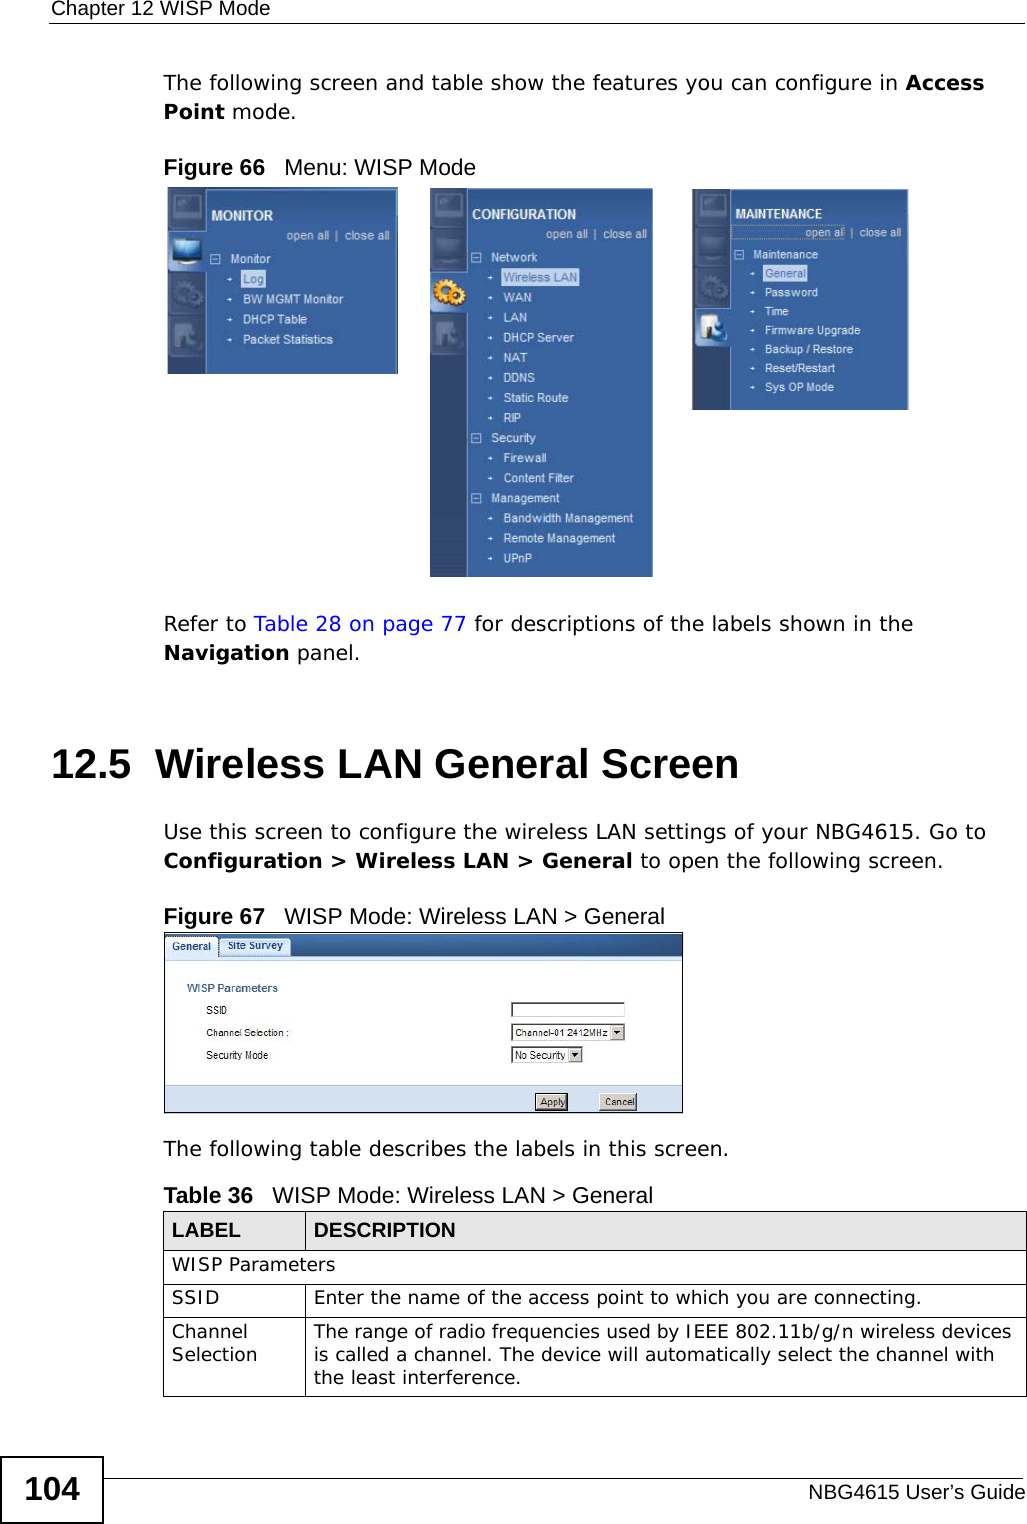 Chapter 12 WISP ModeNBG4615 User’s Guide104The following screen and table show the features you can configure in Access Point mode.Figure 66   Menu: WISP Mode Refer to Table 28 on page 77 for descriptions of the labels shown in the Navigation panel.12.5  Wireless LAN General ScreenUse this screen to configure the wireless LAN settings of your NBG4615. Go to Configuration &gt; Wireless LAN &gt; General to open the following screen.Figure 67   WISP Mode: Wireless LAN &gt; General The following table describes the labels in this screen. Table 36   WISP Mode: Wireless LAN &gt; GeneralLABEL  DESCRIPTIONWISP ParametersSSID Enter the name of the access point to which you are connecting.Channel Selection The range of radio frequencies used by IEEE 802.11b/g/n wireless devices is called a channel. The device will automatically select the channel with the least interference.